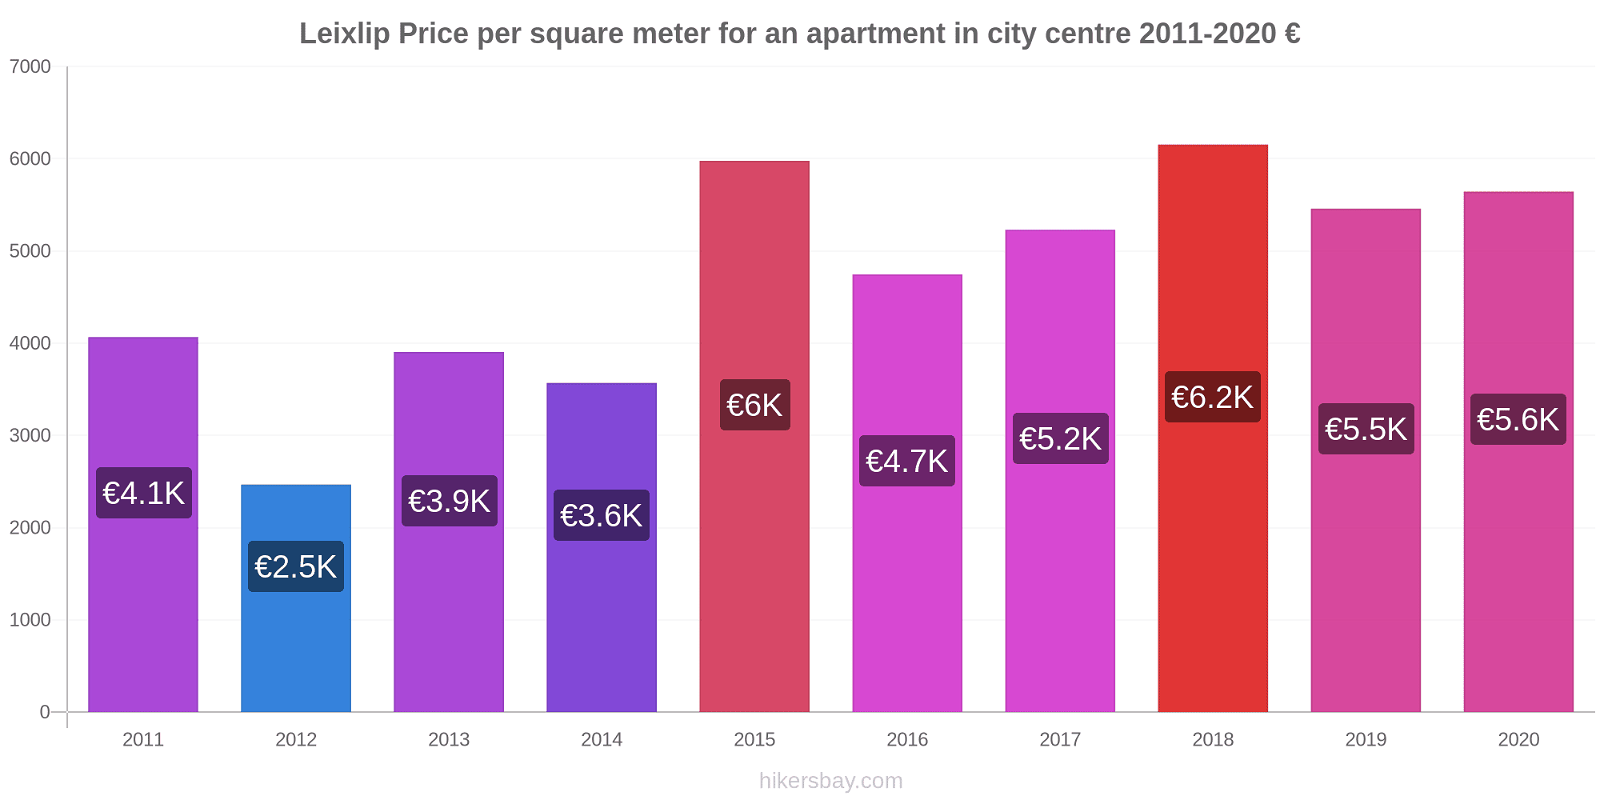 Leixlip price changes Price per square meter for an apartment in city centre hikersbay.com